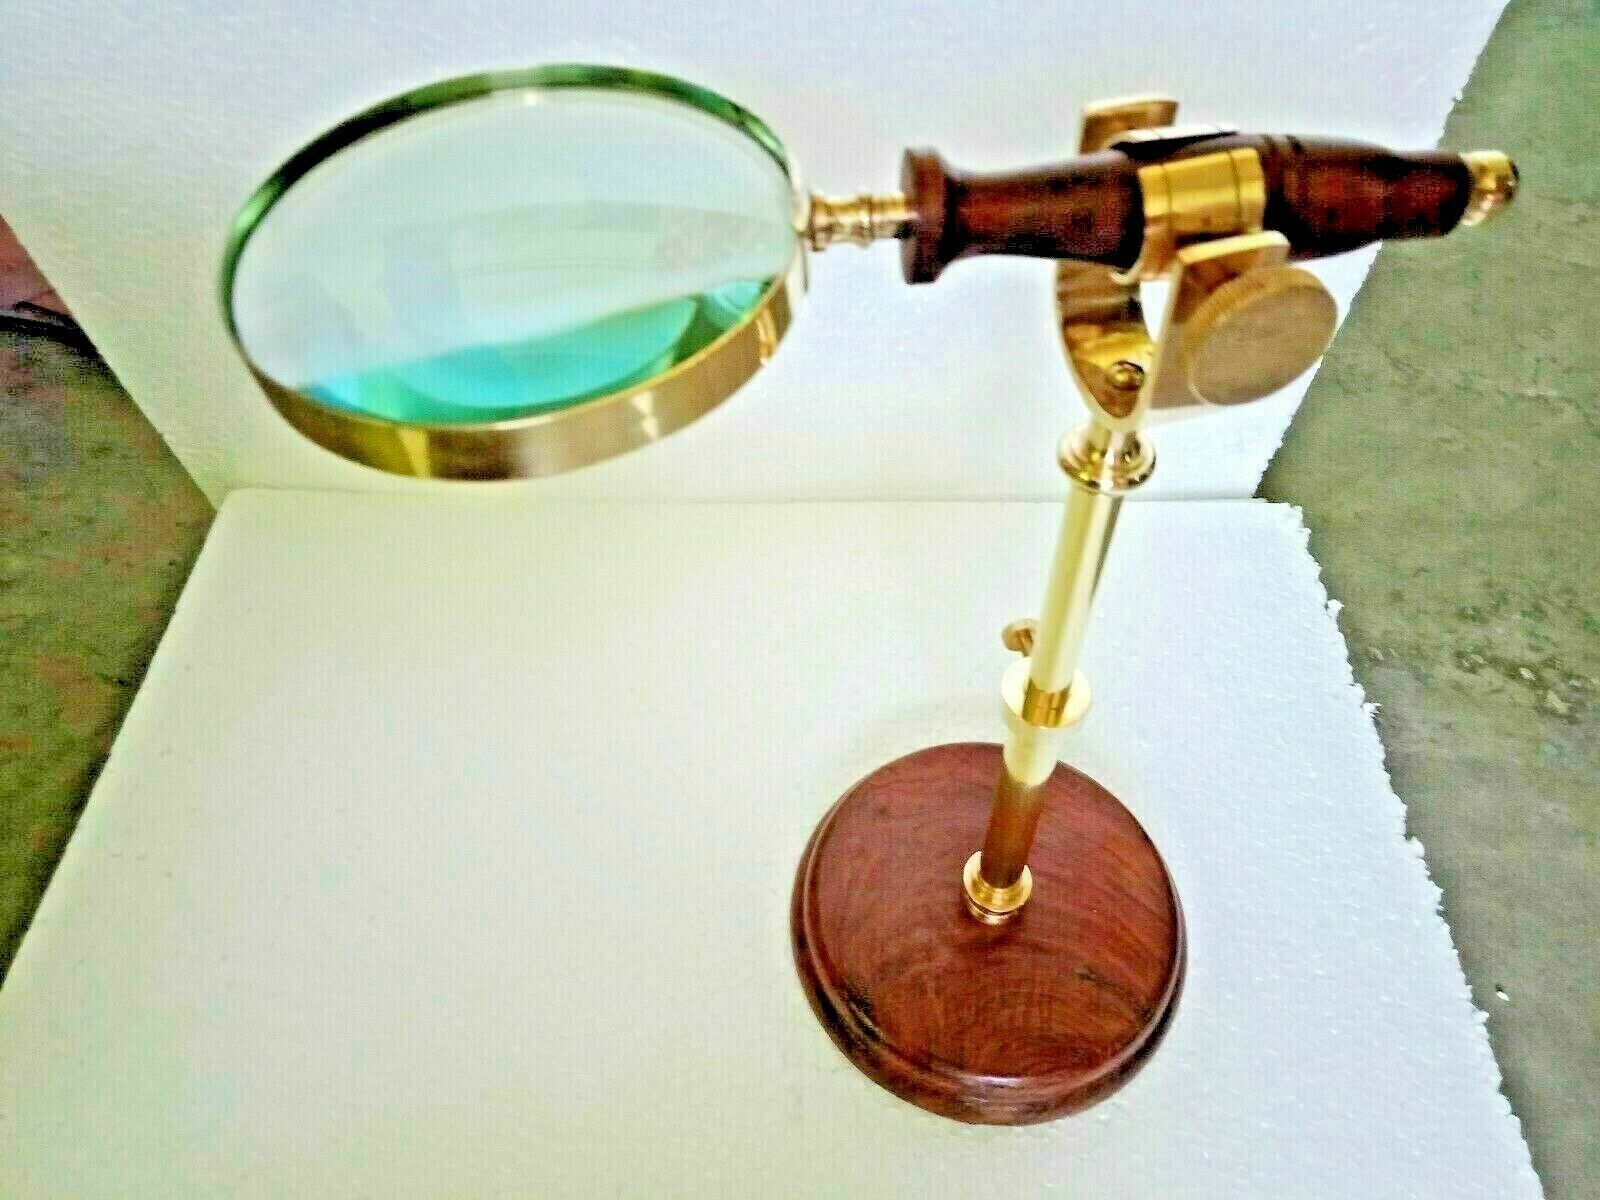 Brass Handheld Magnifying Glass With Wood Stand Decor Reading Magnifier Lens